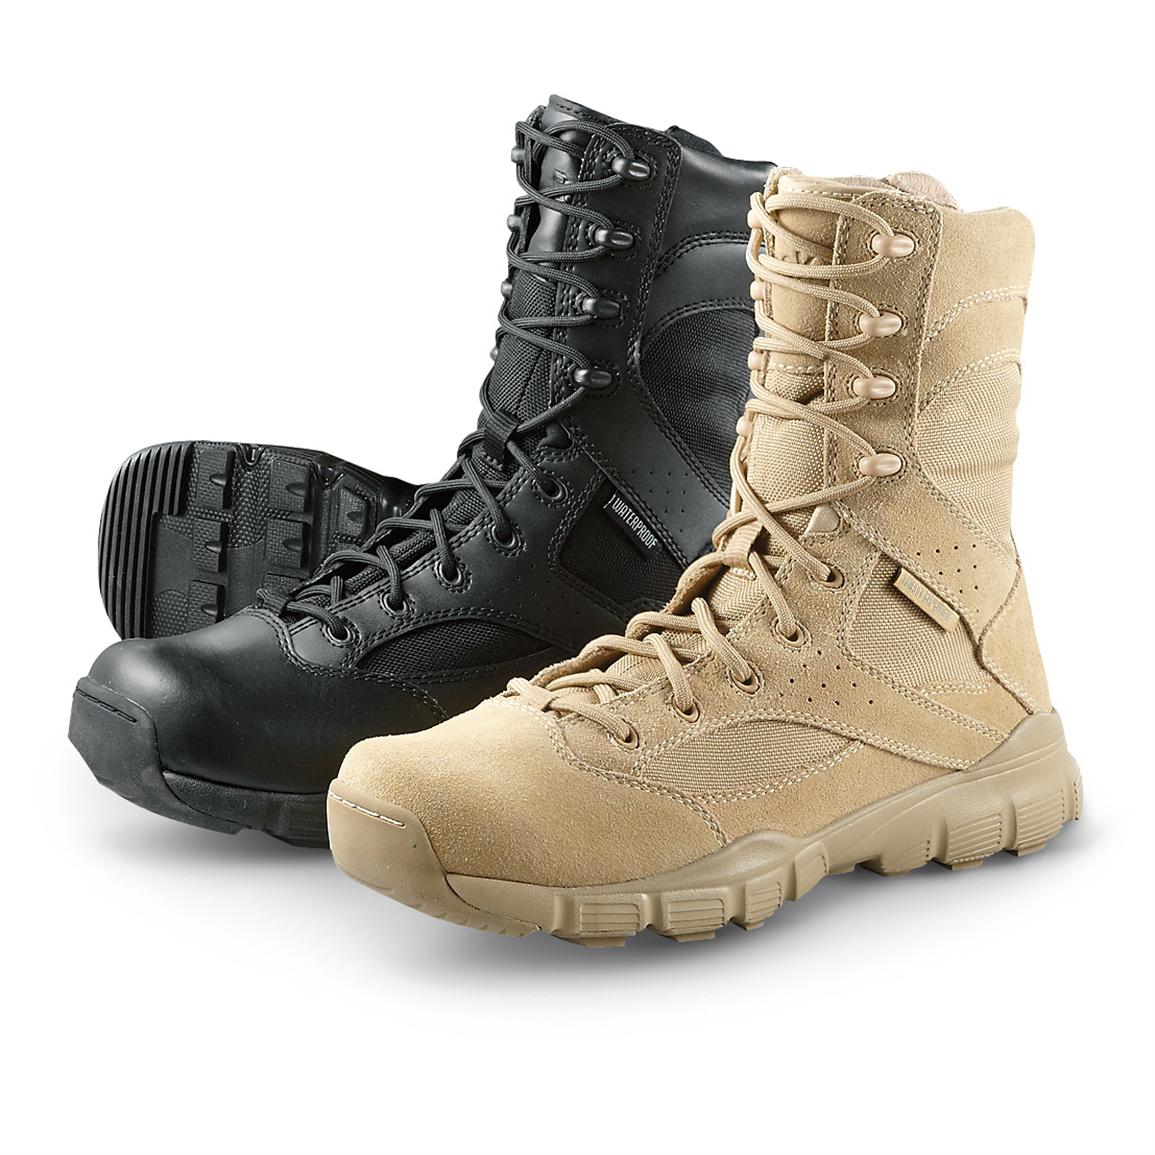 reebok tactical boots Sale,up to 50 